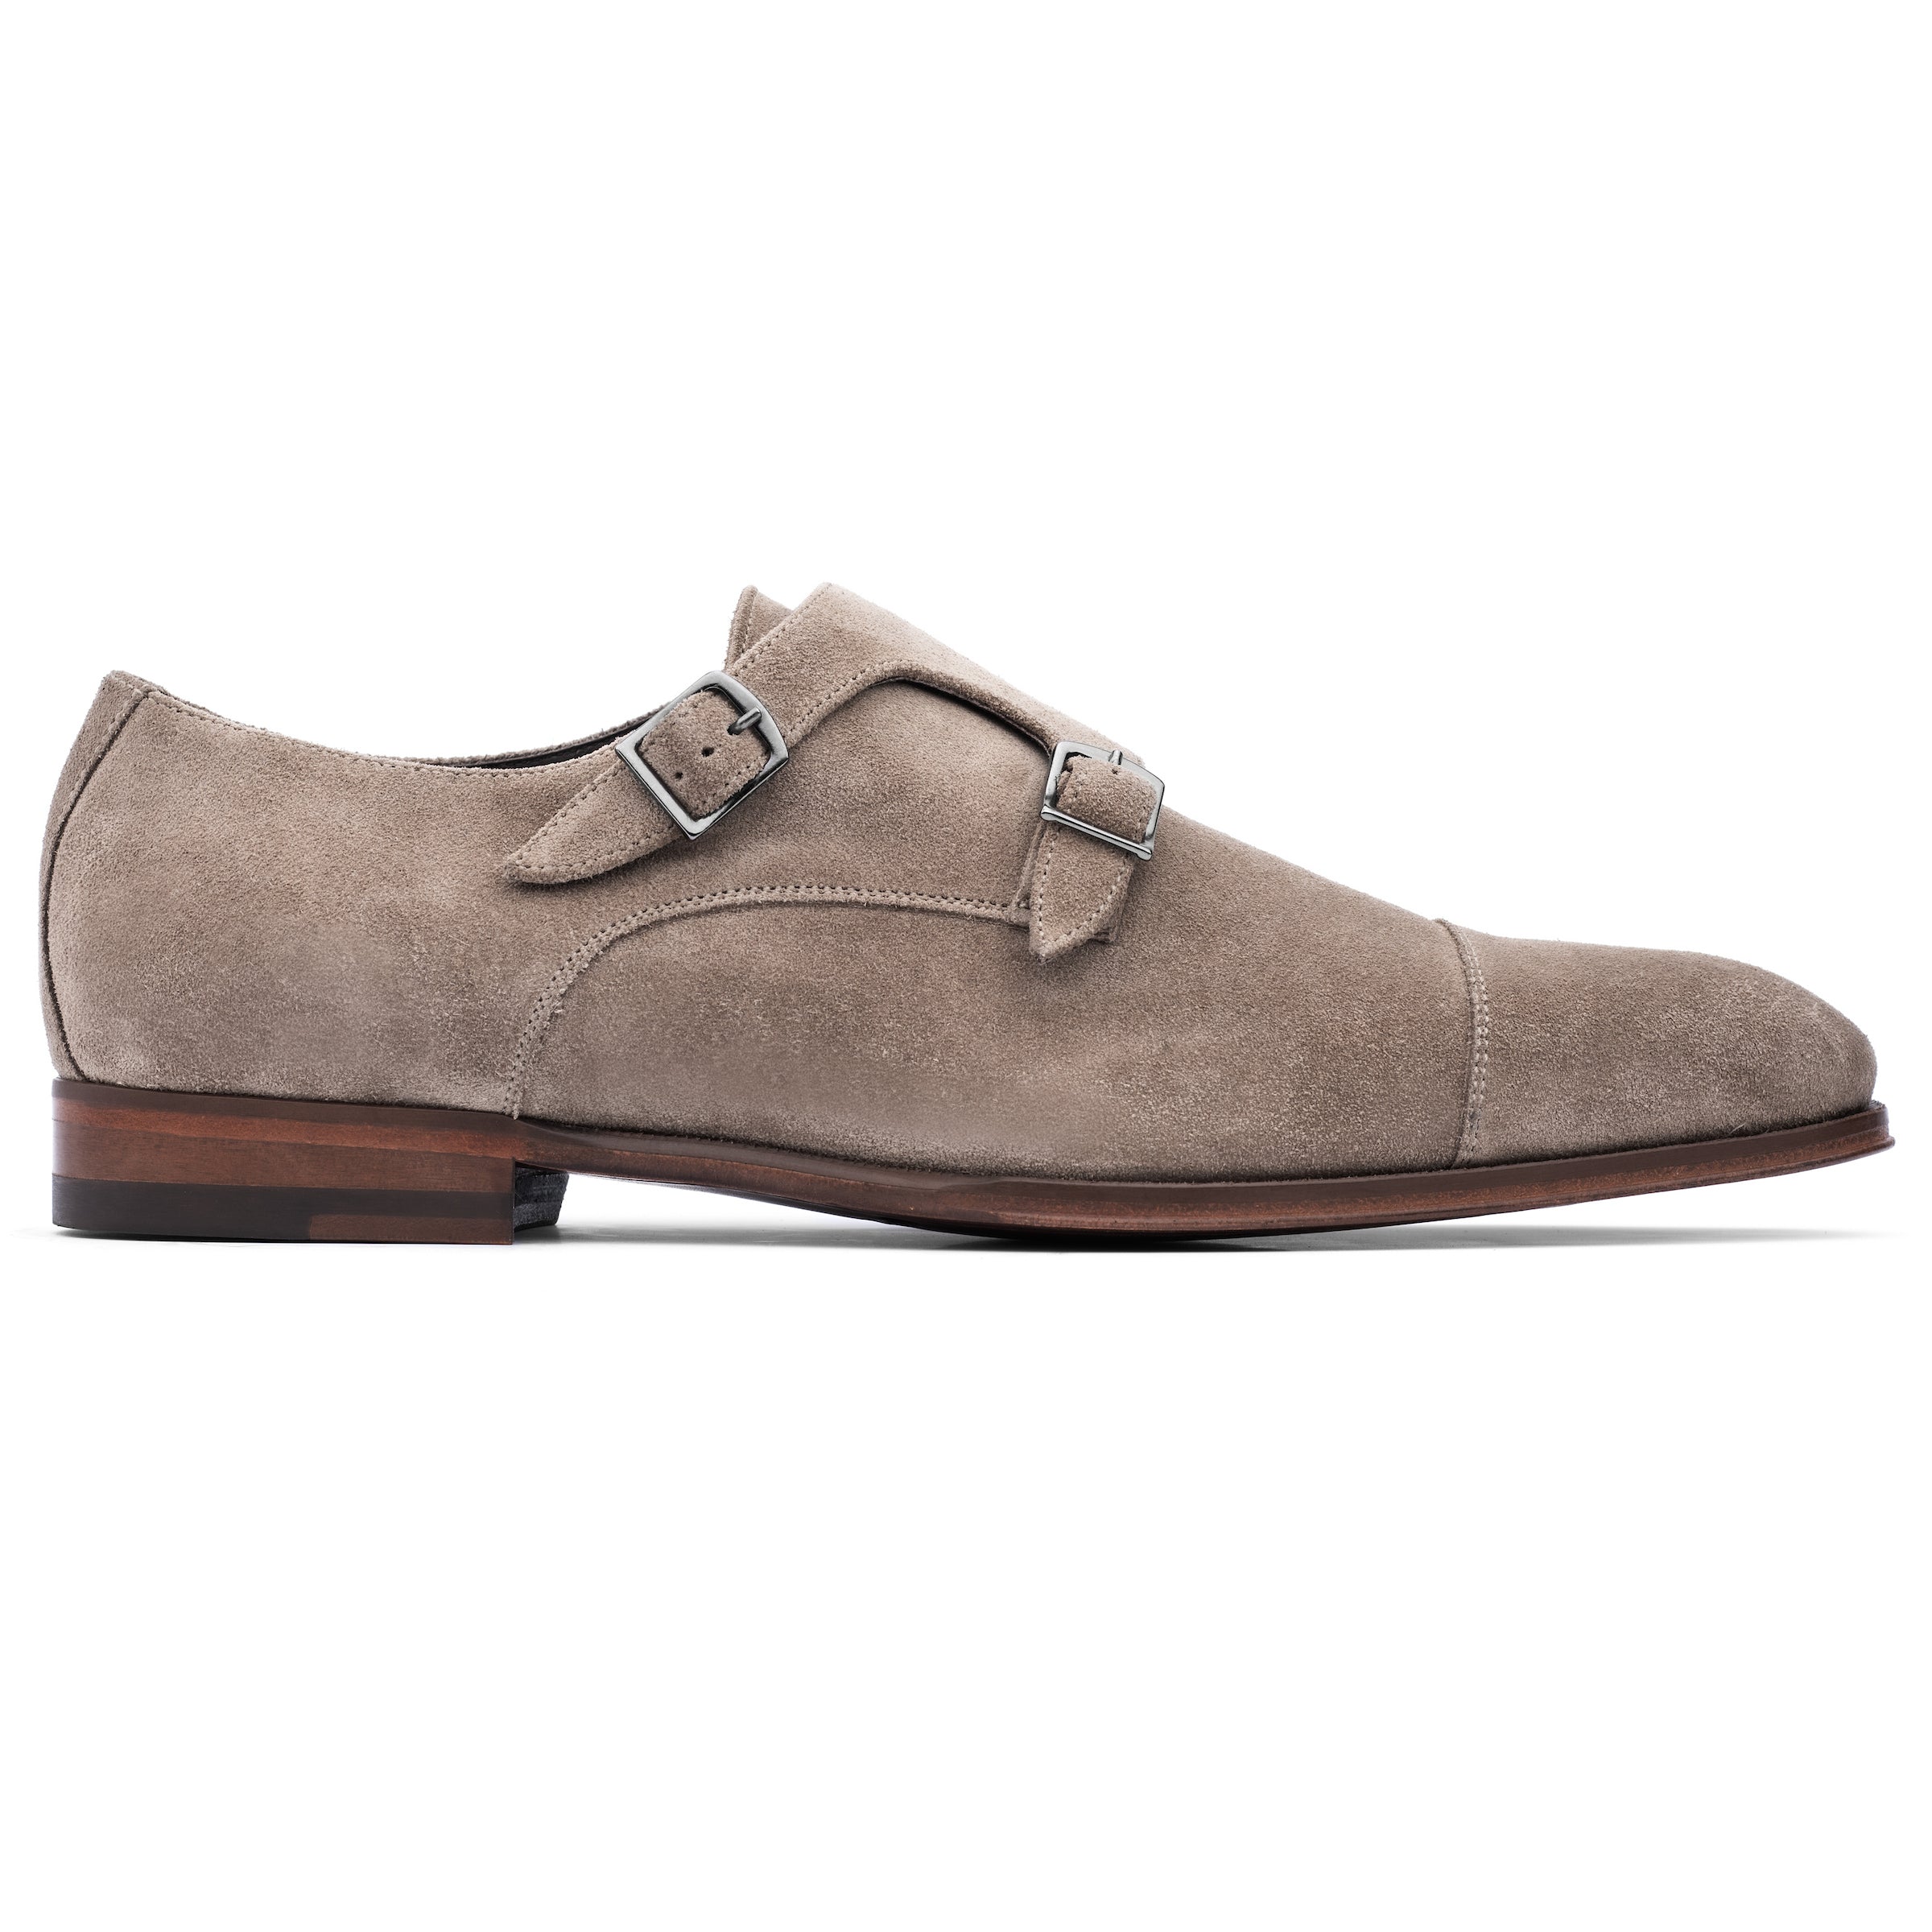 Addison Taupe Suede Double Buckle Monkstrap